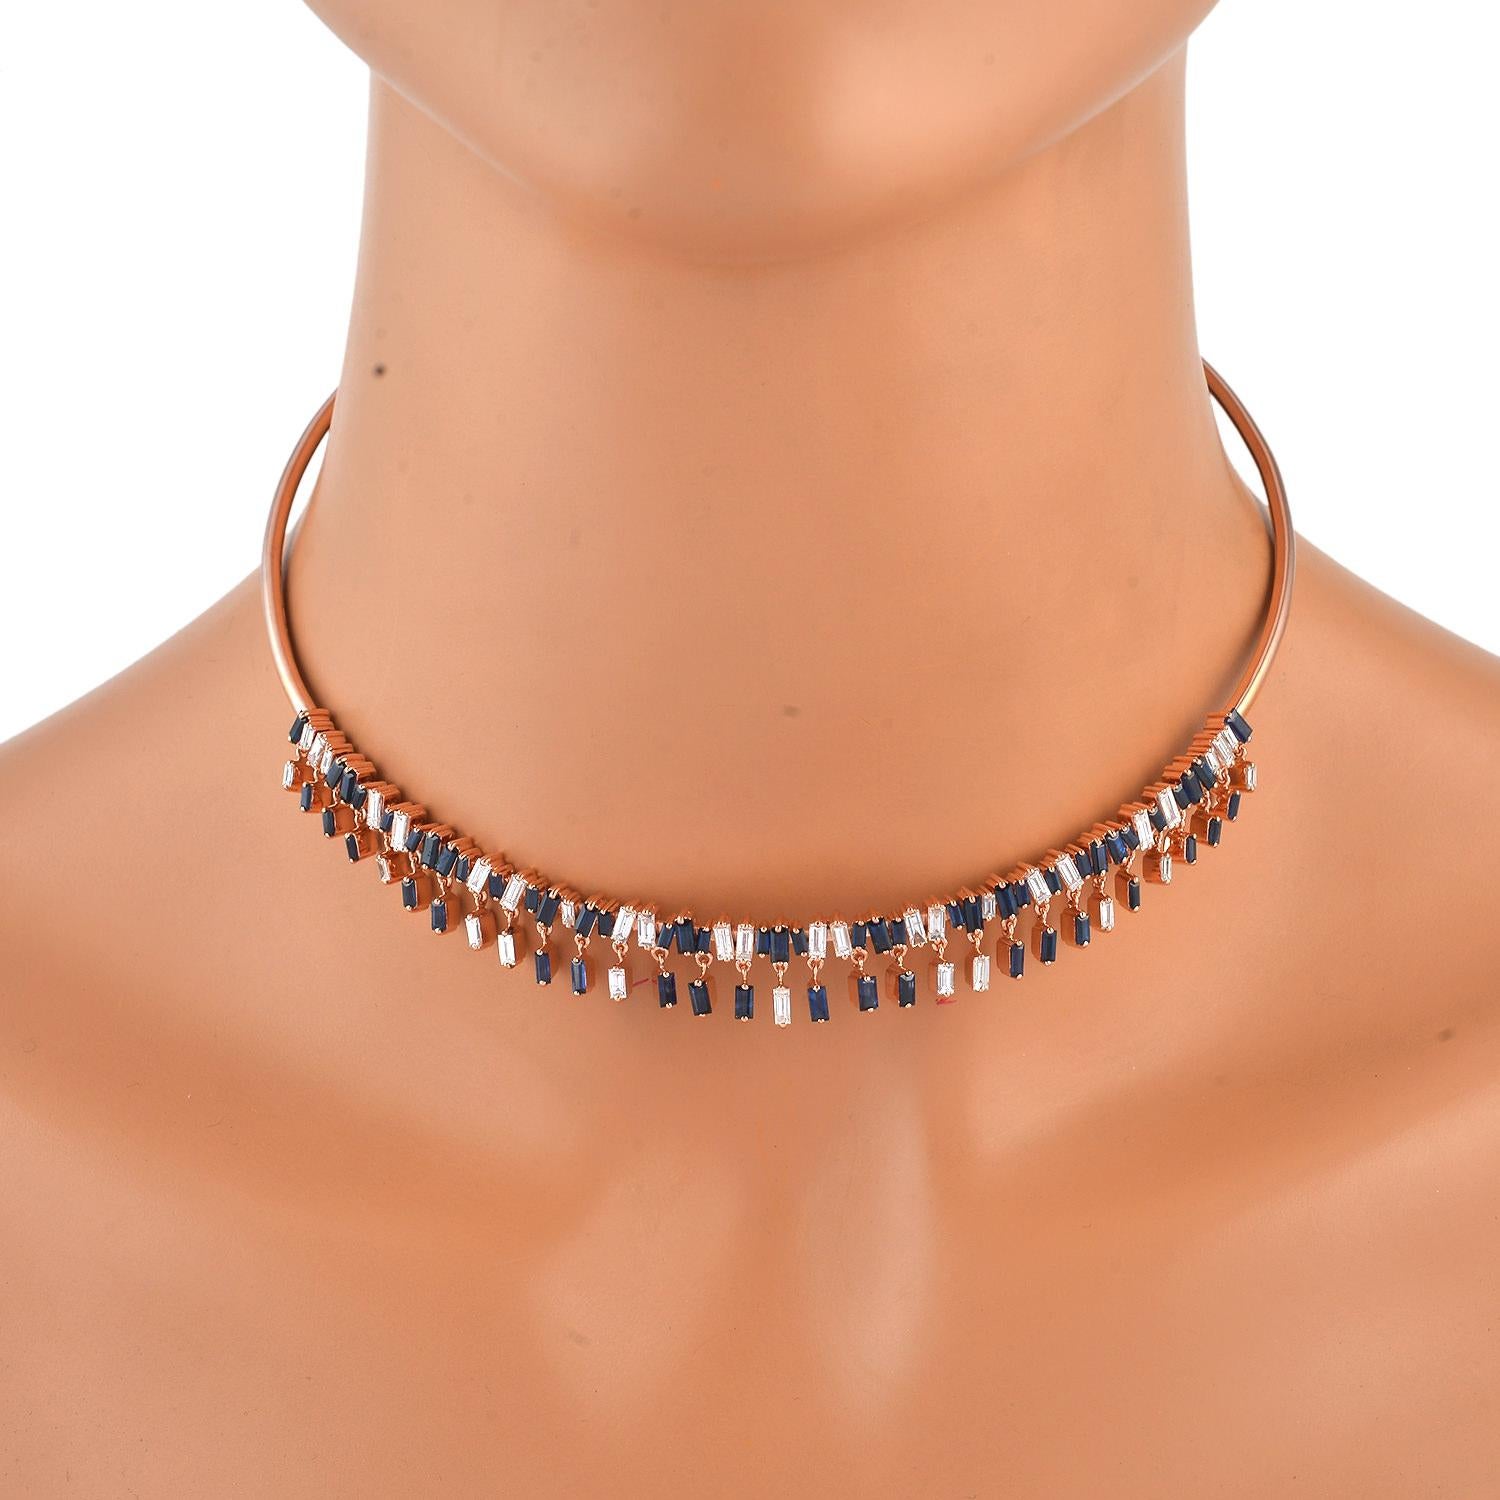 Cast in 14 karat gold, this stunning choker necklace is hand set in 6.49 carats baguette cut blue sapphire and 2.81 carats of diamonds. It is expertly placed in dangling settings. Available in yellow and white gold.

FOLLOW  MEGHNA JEWELS storefront